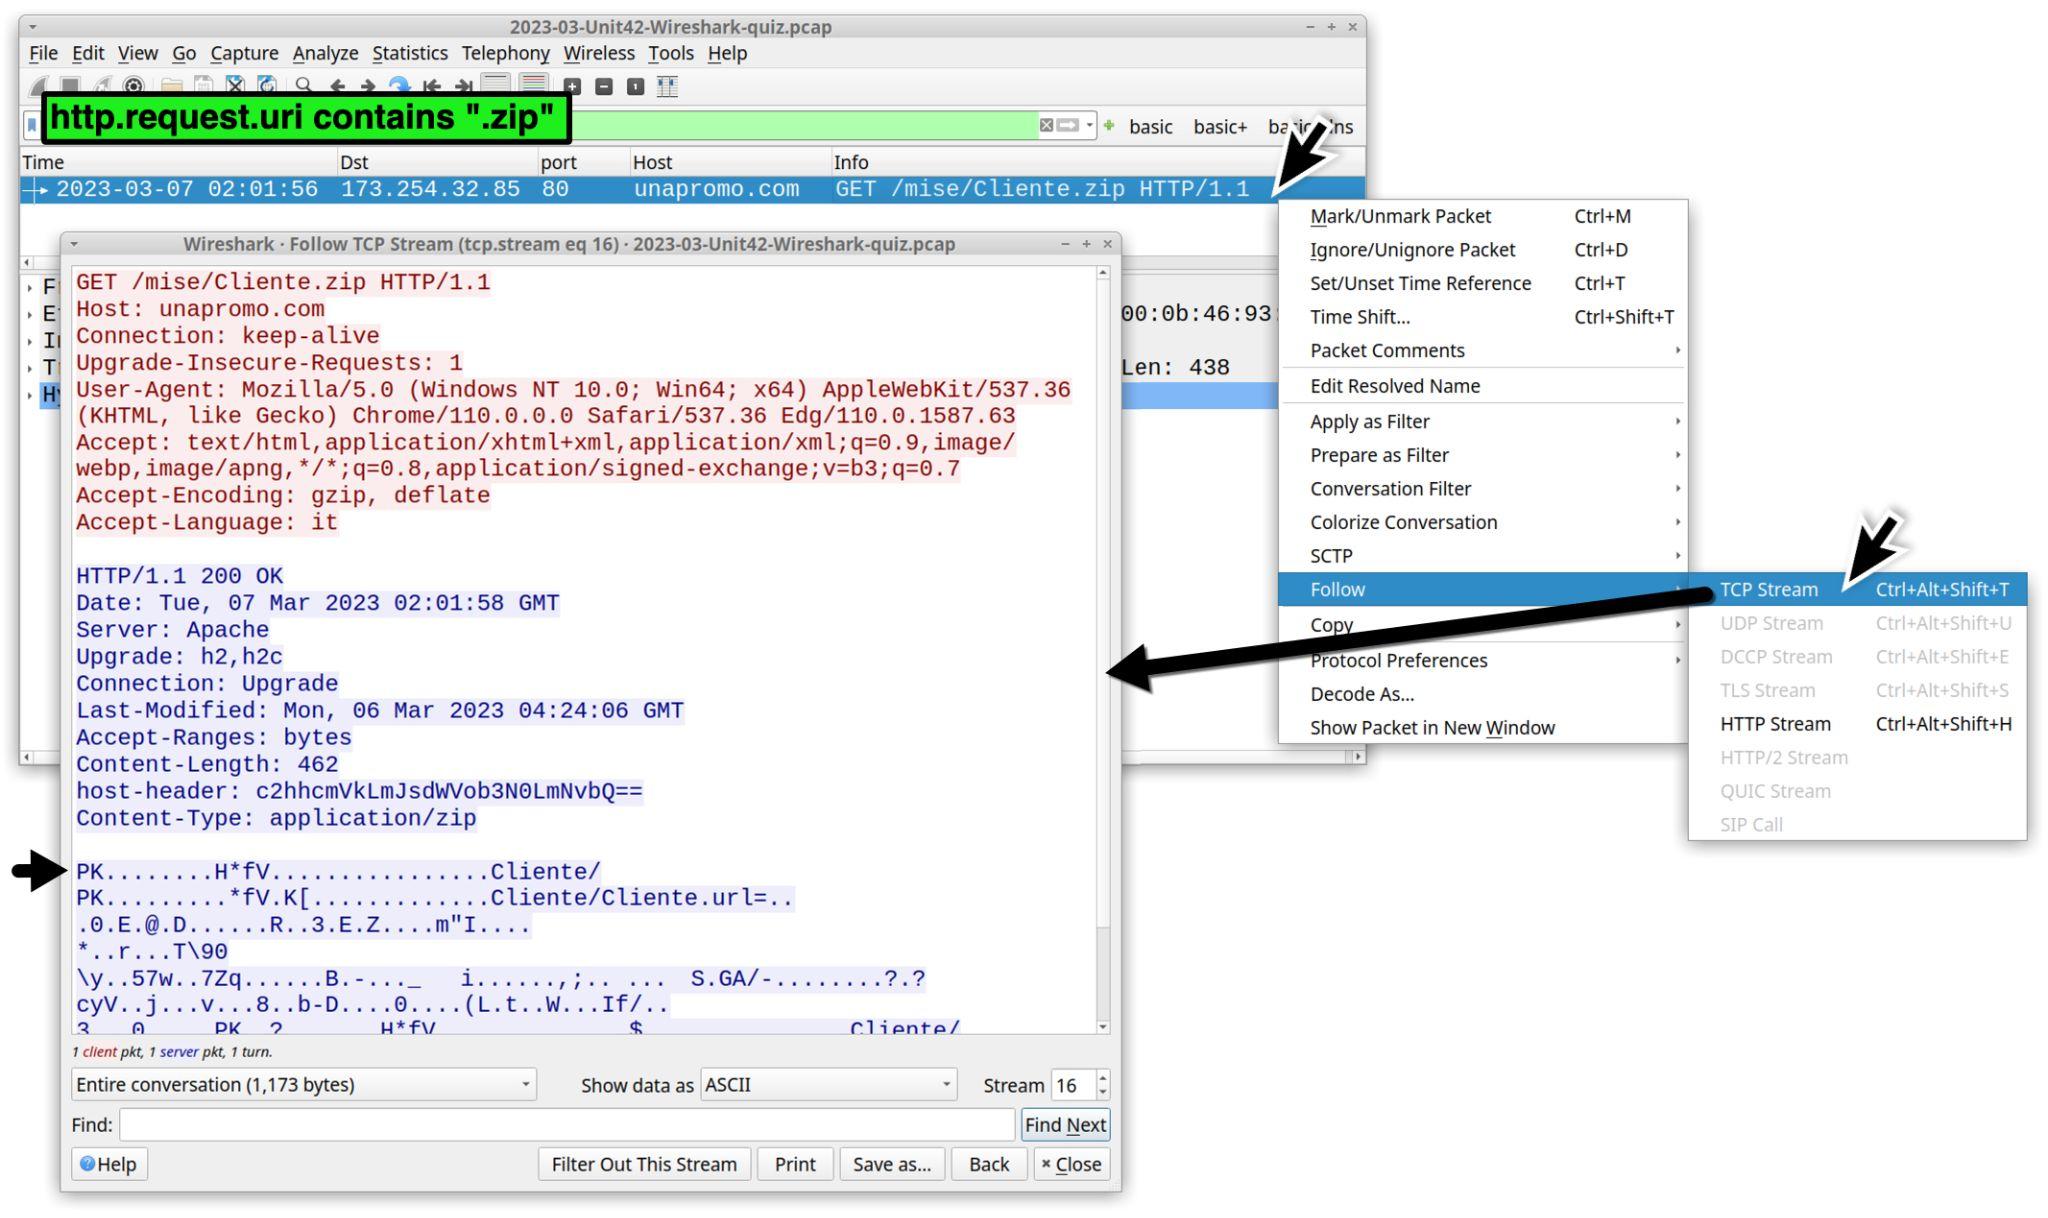 Image 4 is a screenshot of Wireshark showing the menu path of finding the URL in the TCP stream. 